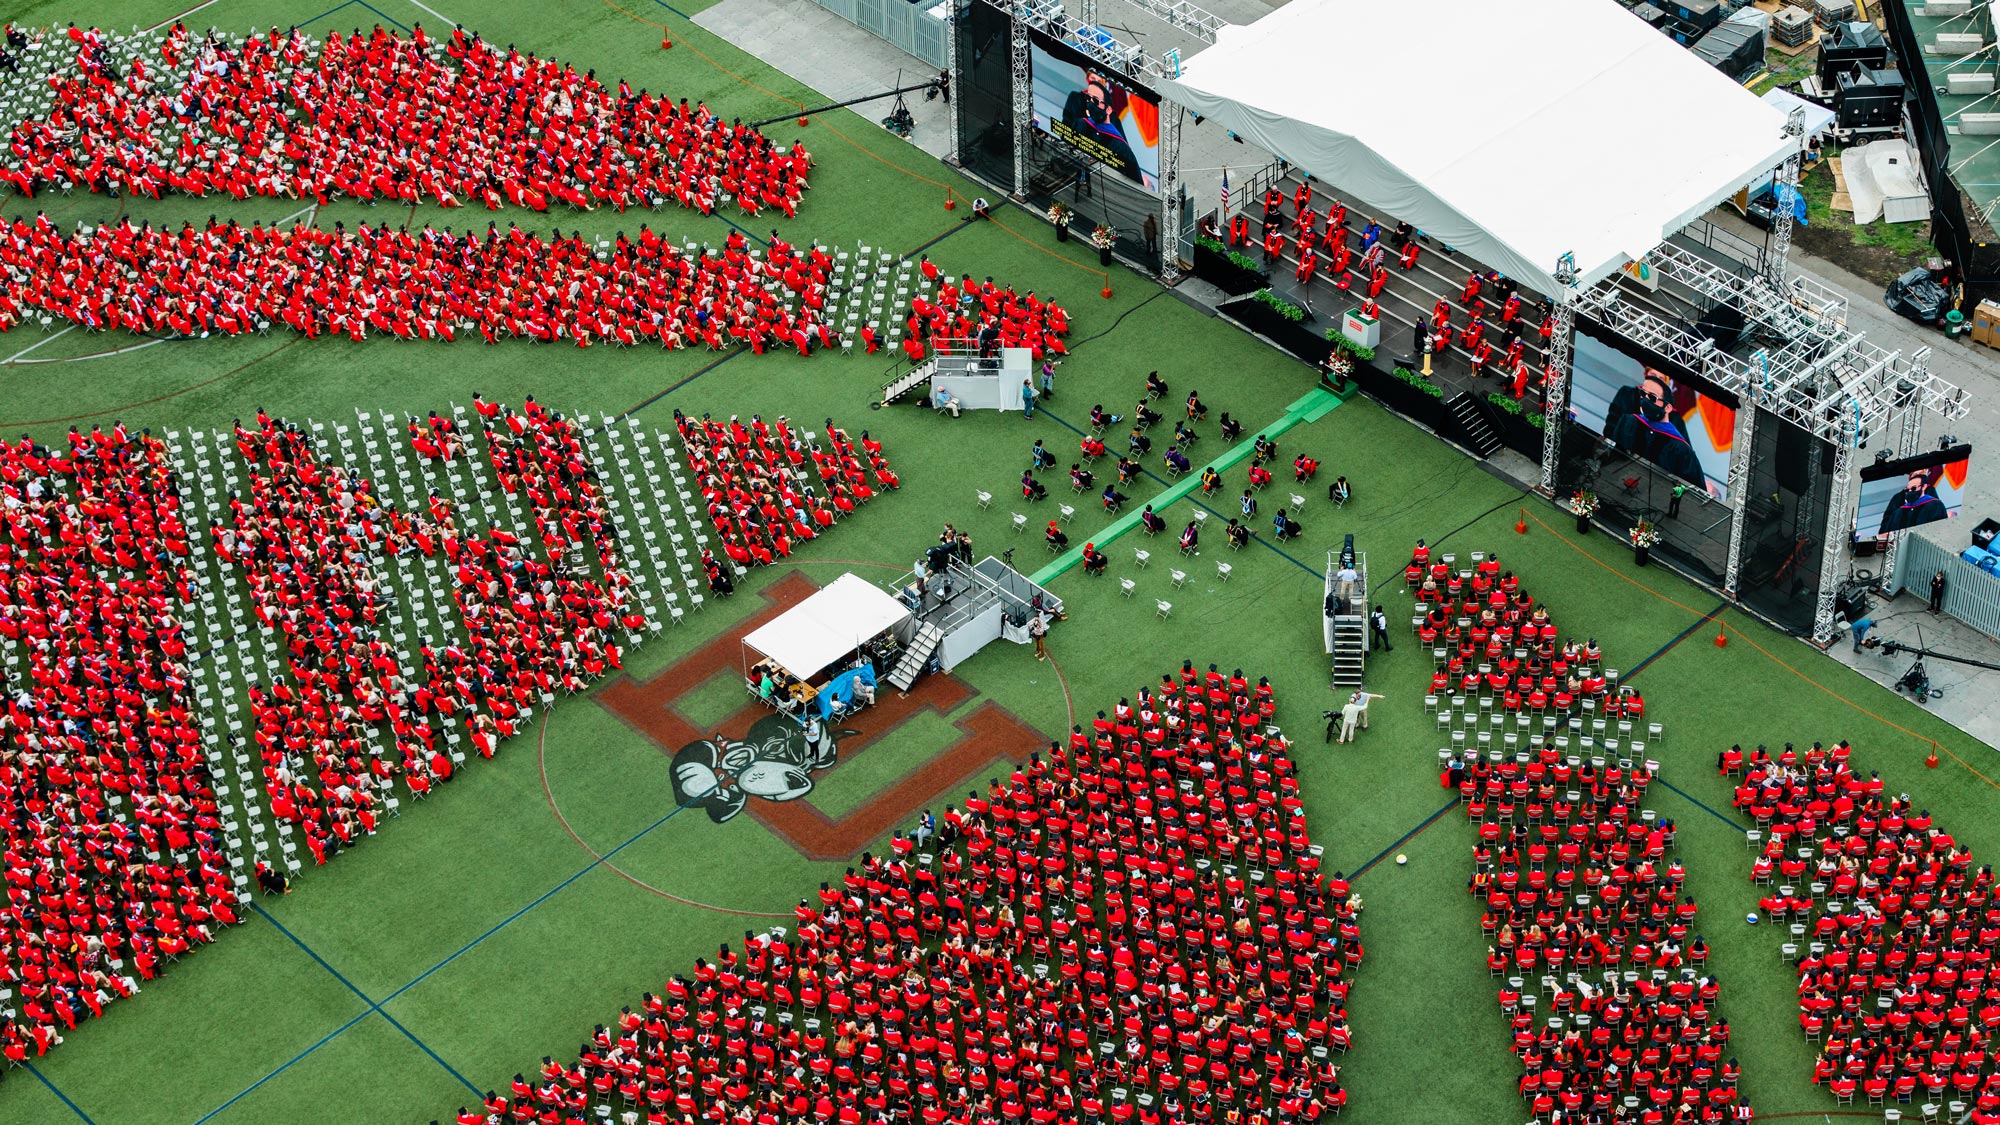 A photo of Nickerson Field from above during commencement